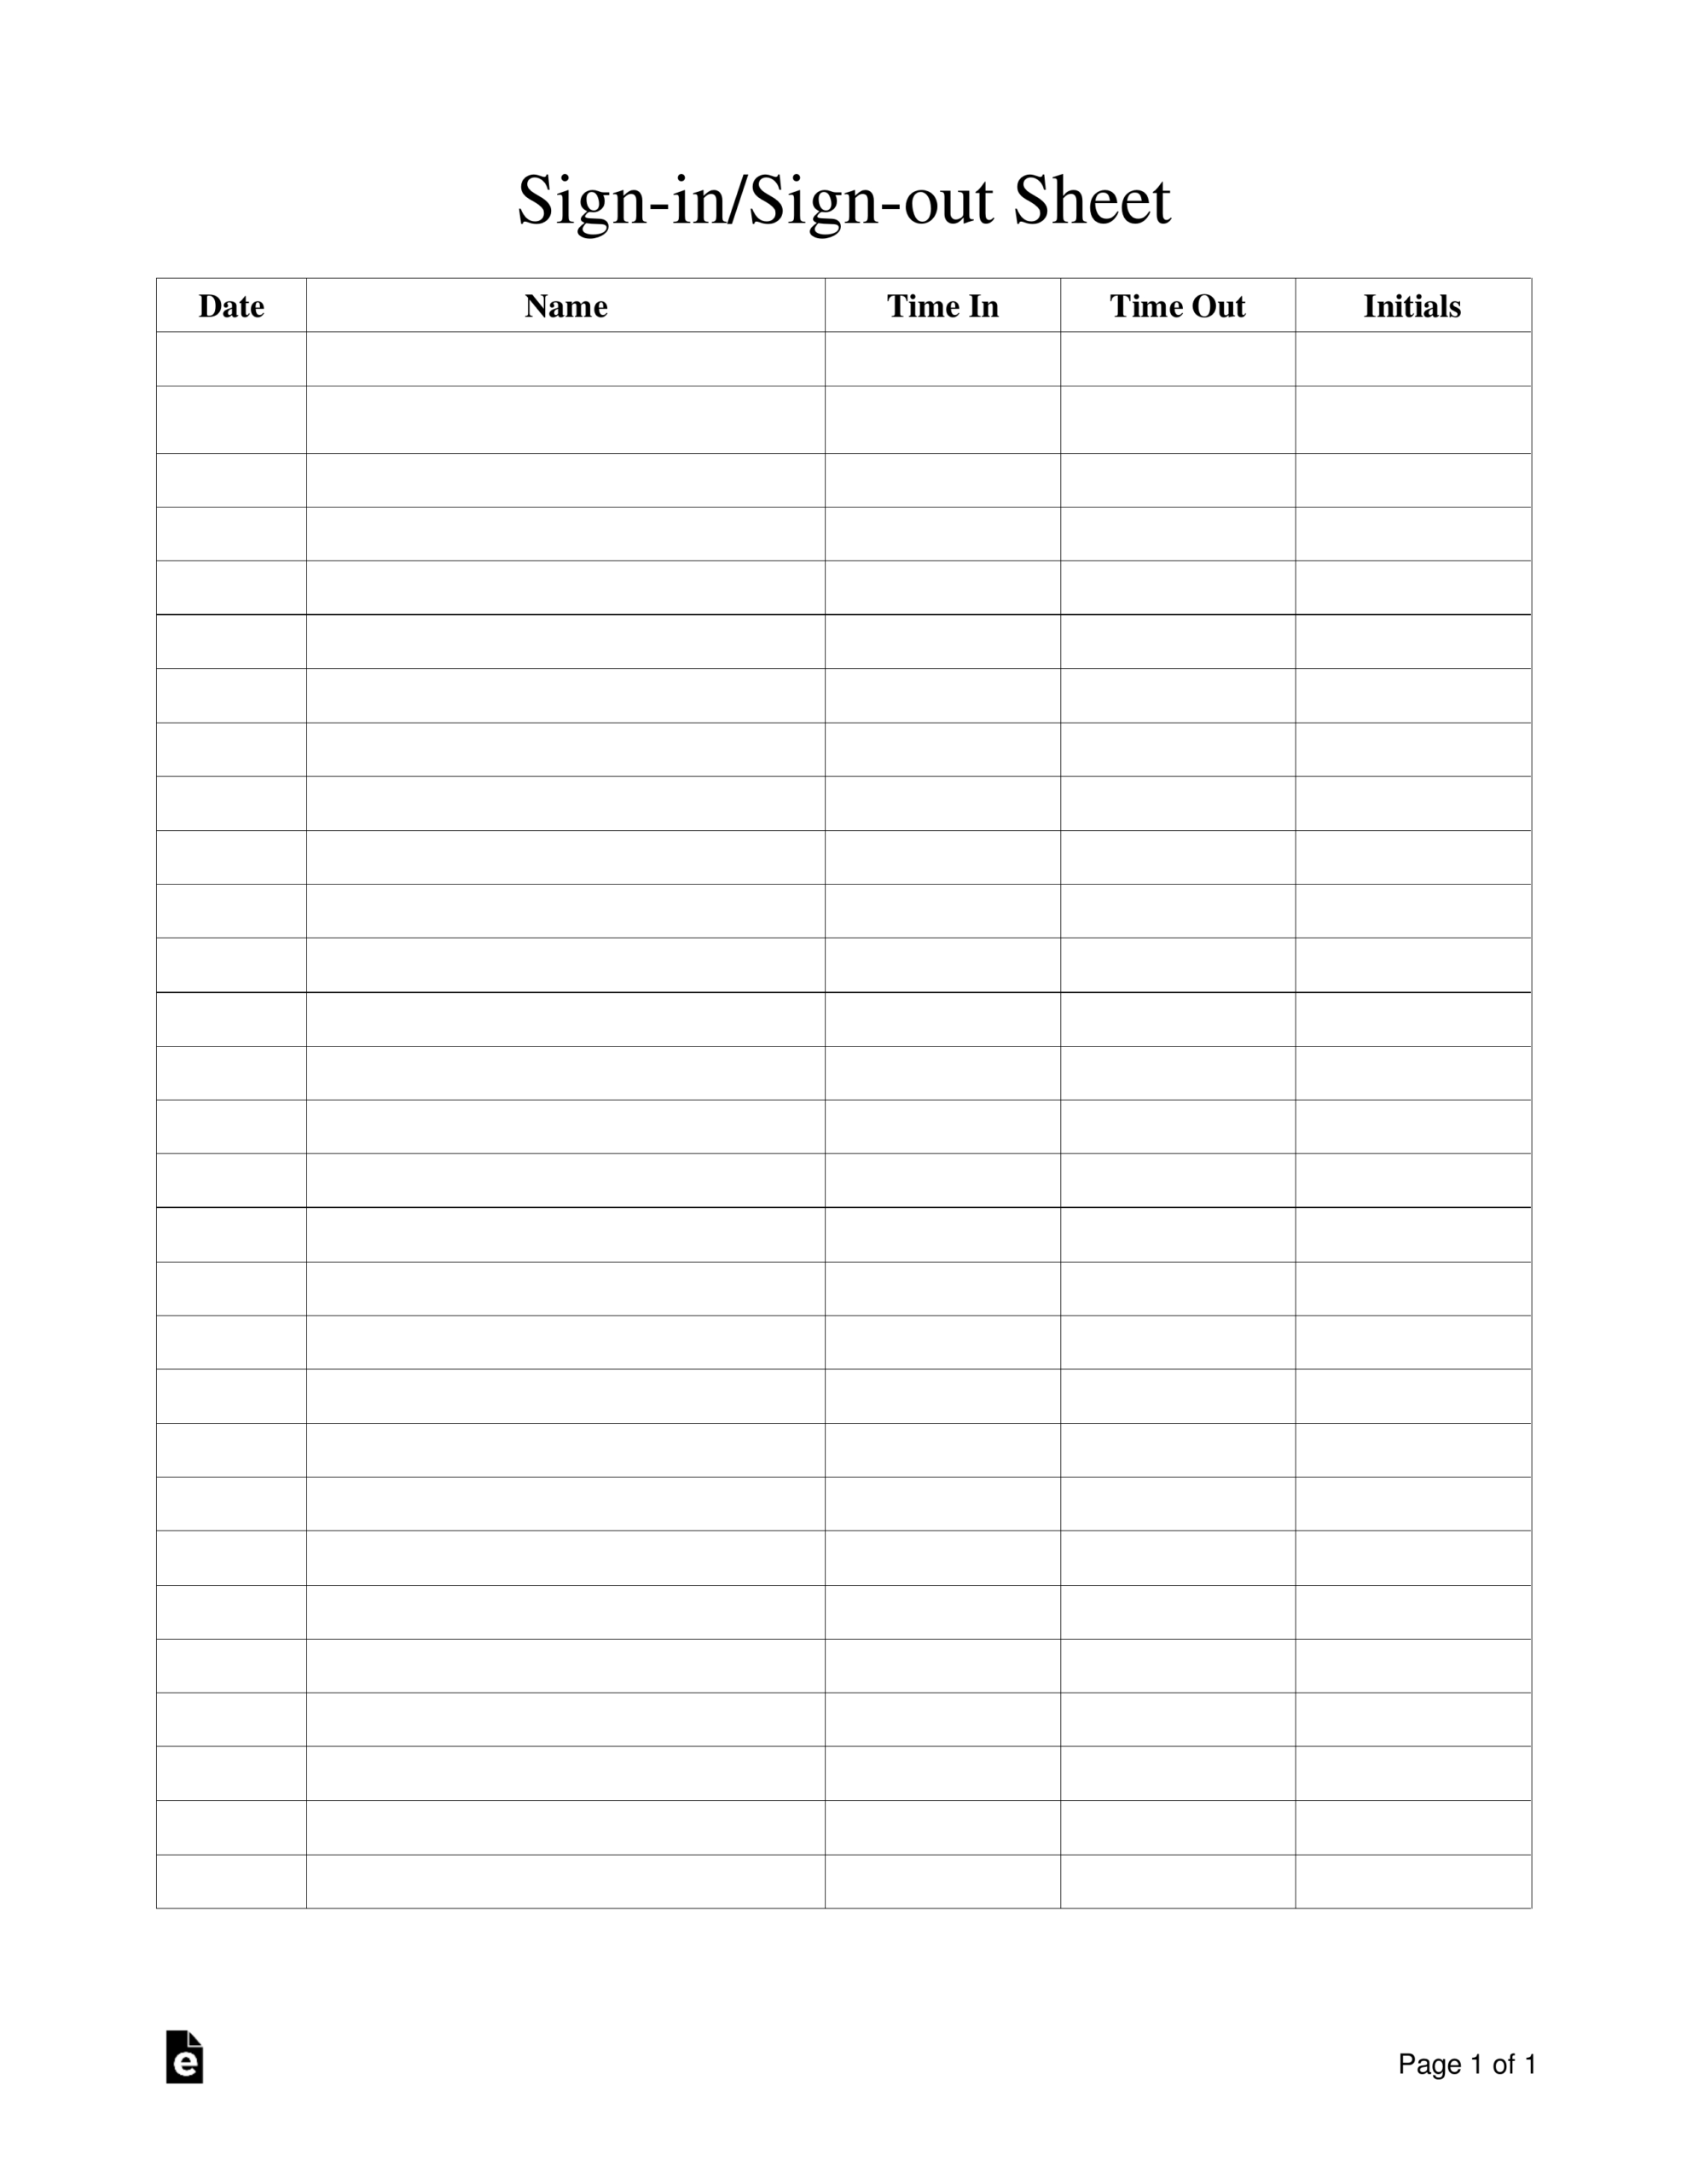 Sign In/sign Out Sheet Template | Eforms – Free Fillable Forms In Event Sign In Sheet Template